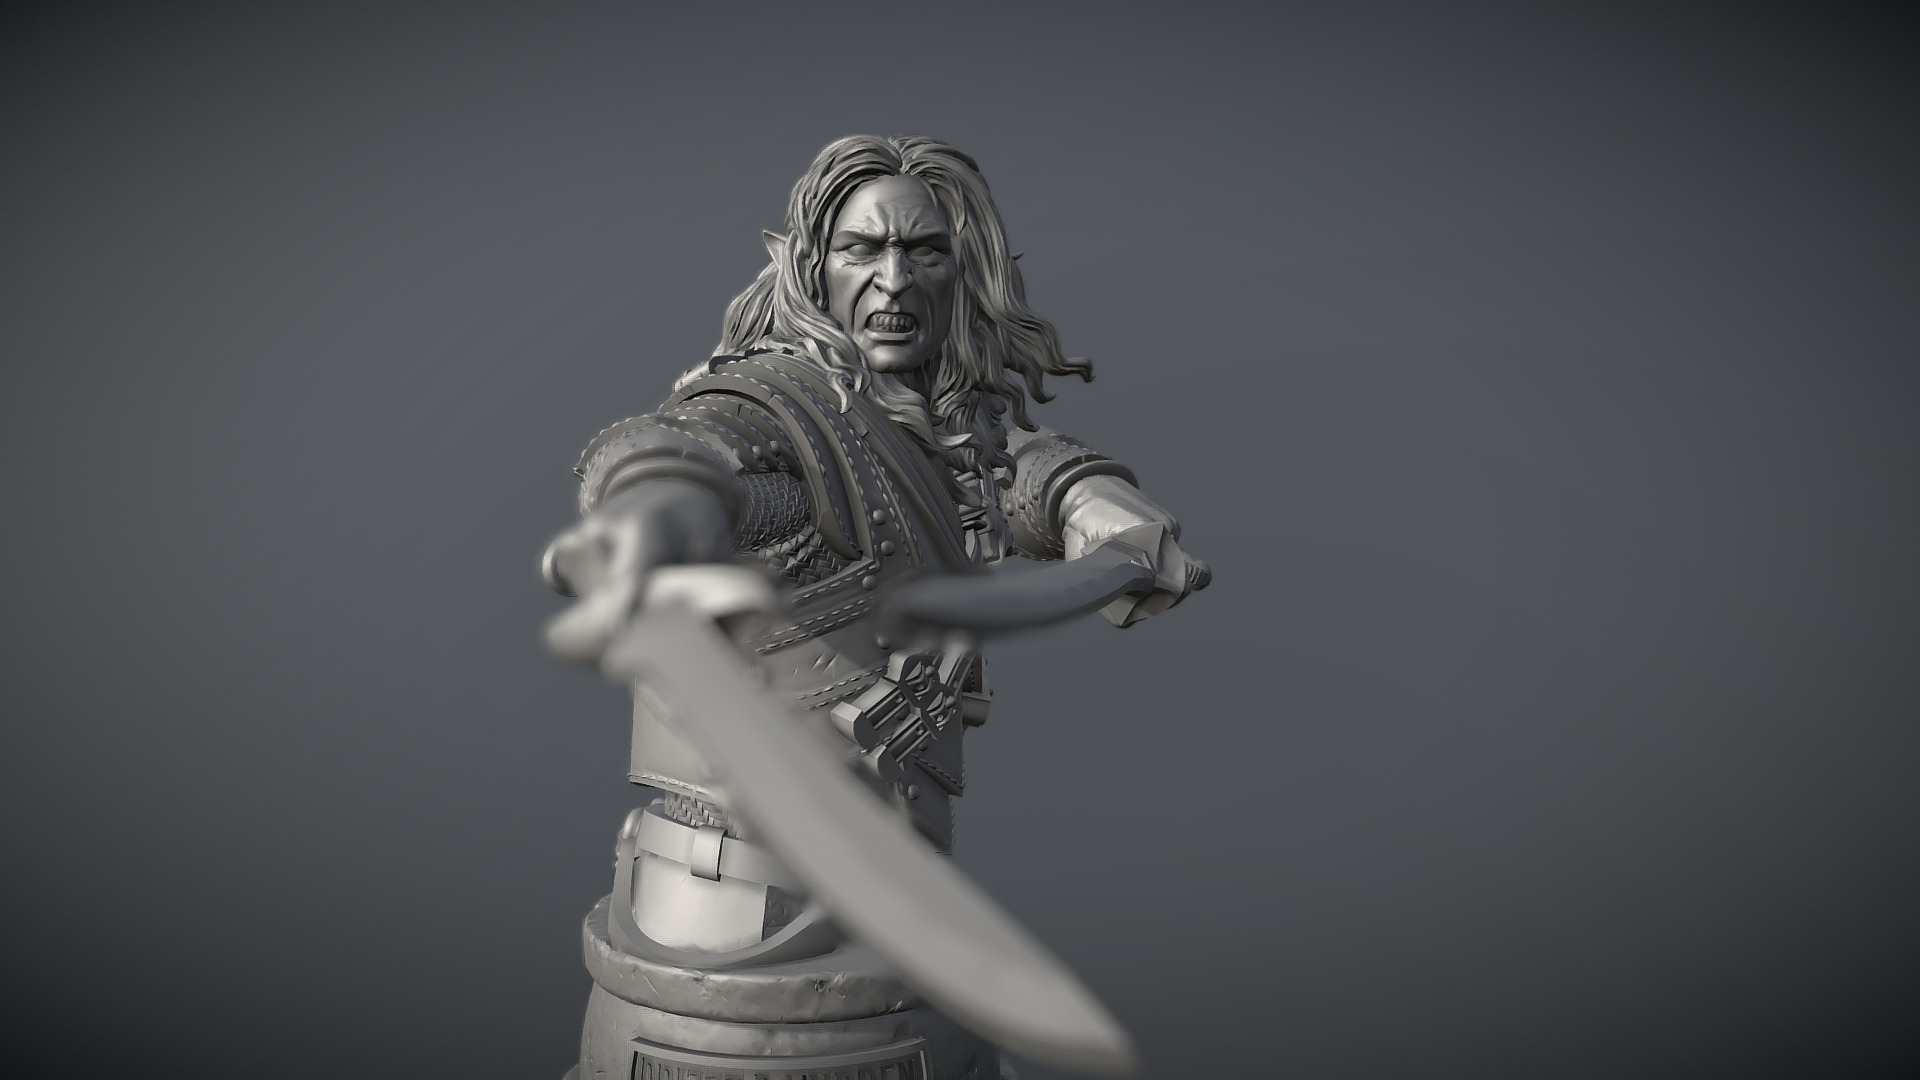 Drizzt - 3D model by charles.woods [f5627db] - Sketchfab